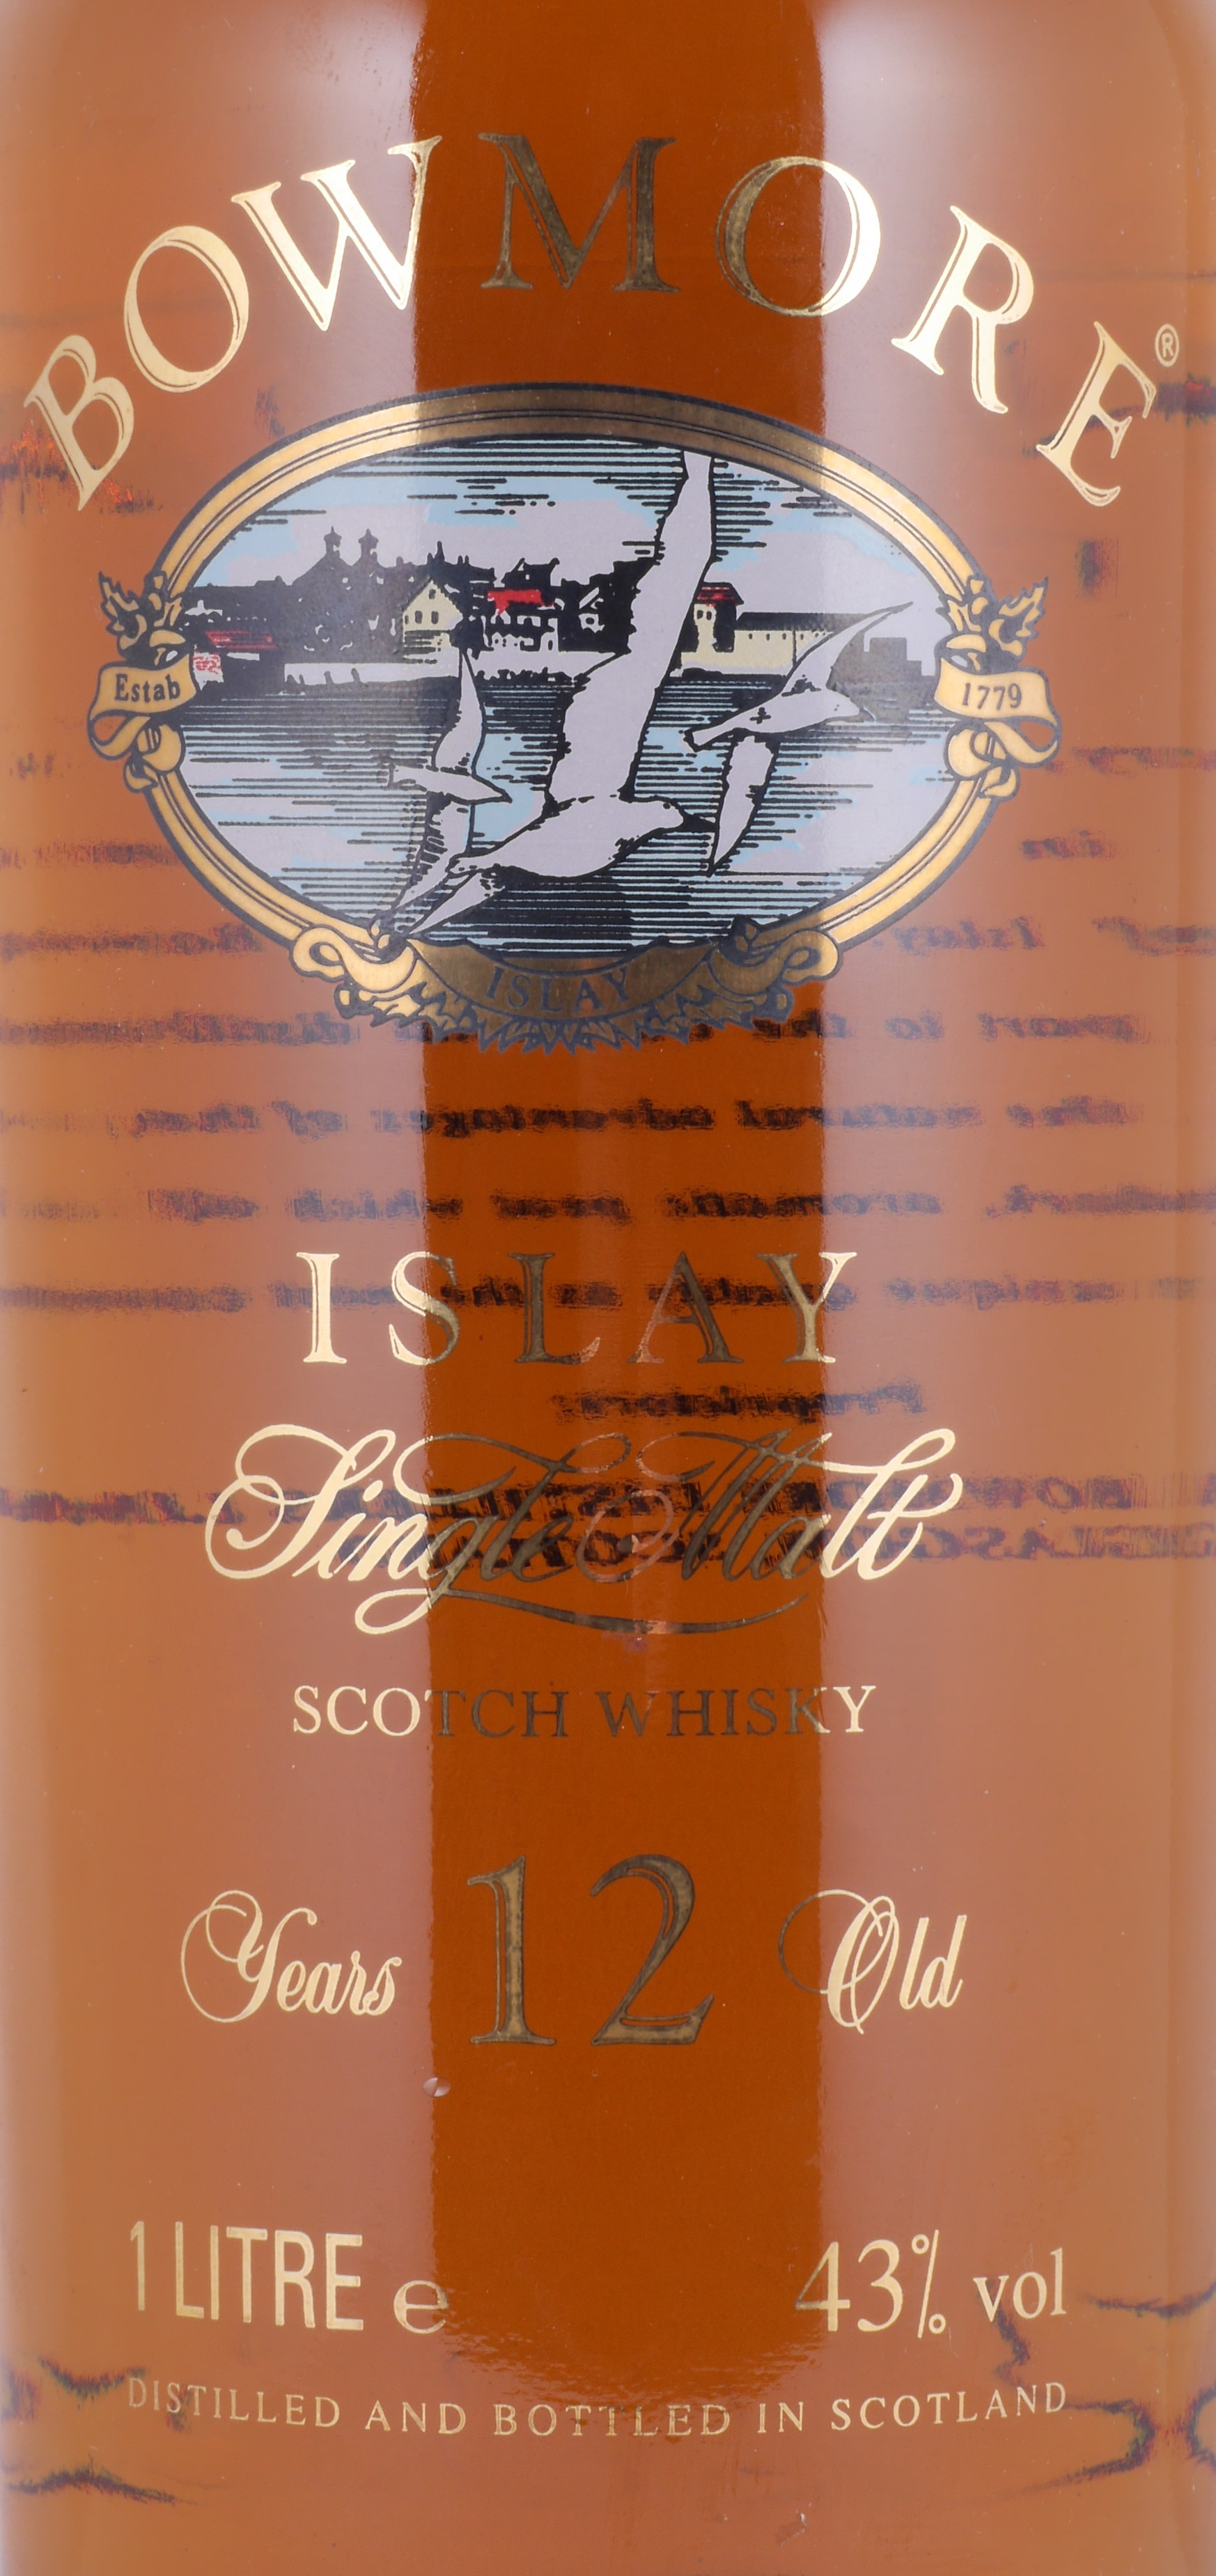 Buy Bowmore 12 43.0% with at Scotch AmCom Icons Printed online Single Years-old Label secure ABV Malt Whisky Islay 3 Glass